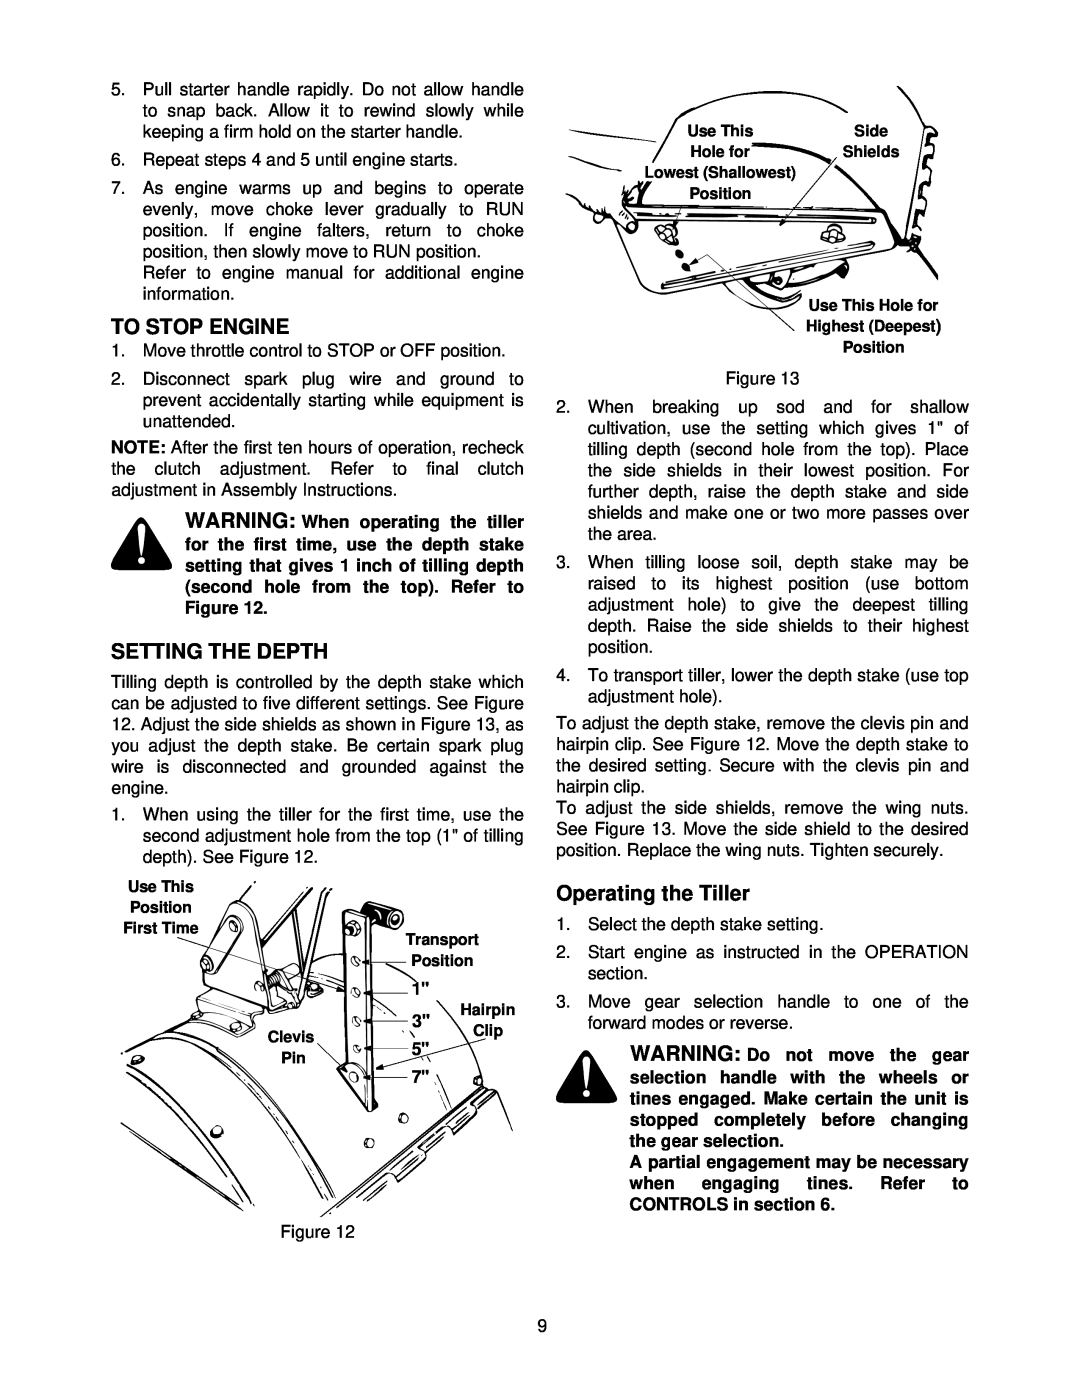 White 414 manual To Stop Engine, Setting The Depth, Operating the Tiller 